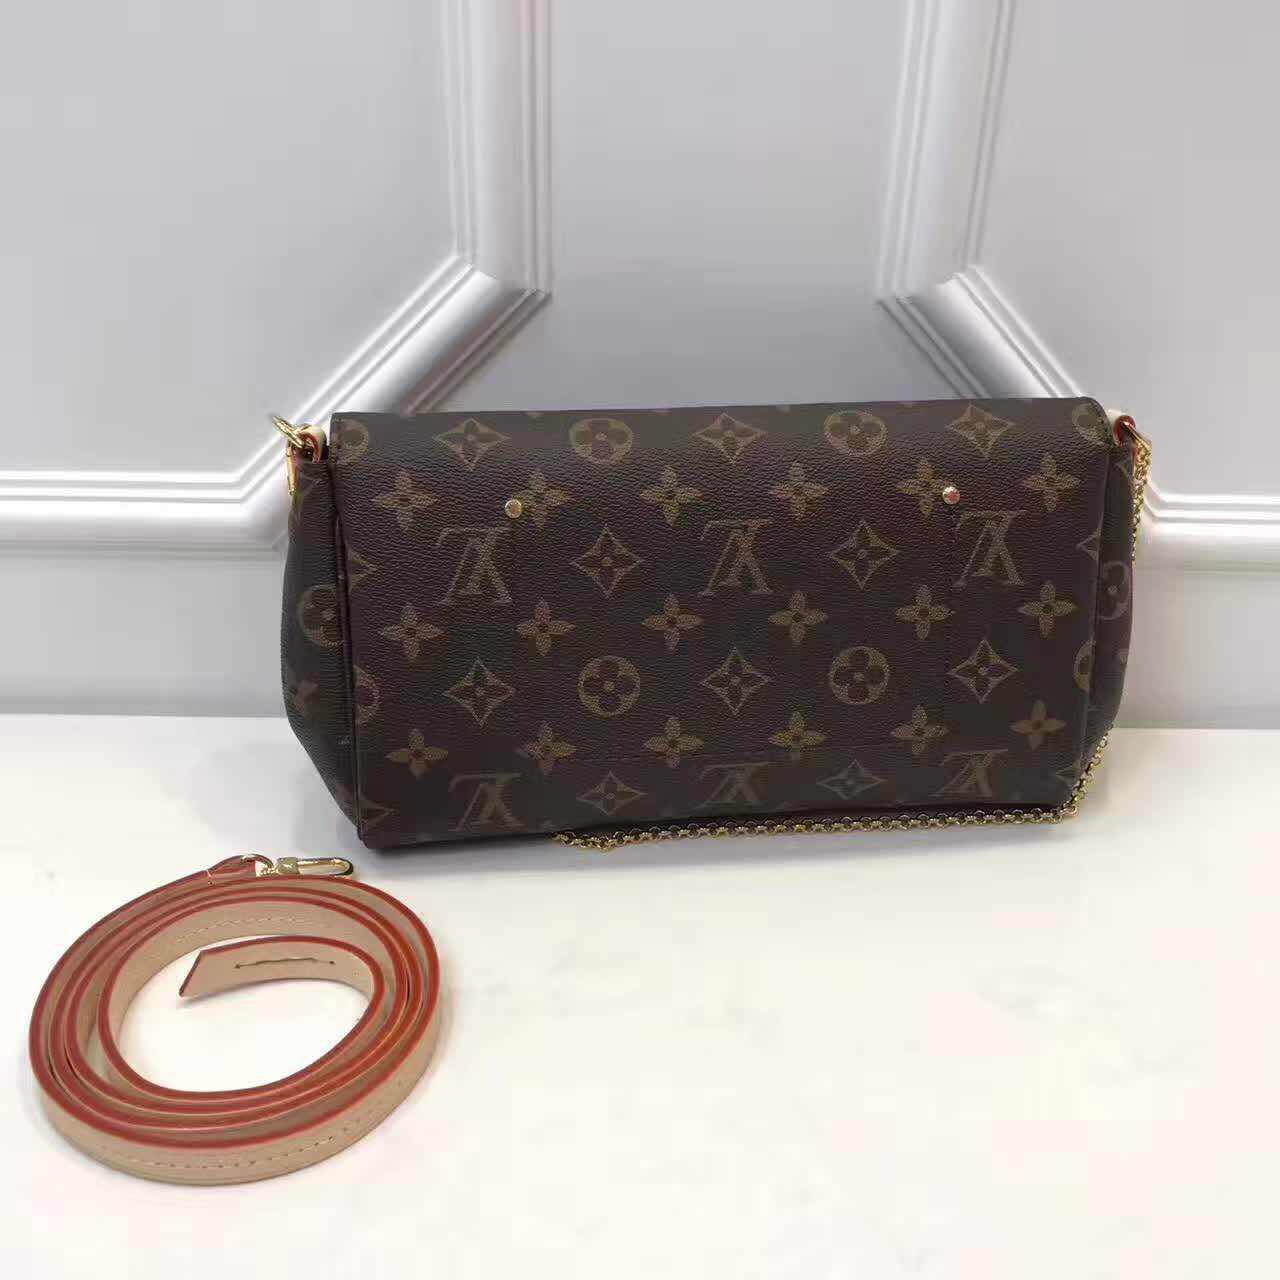 LV Fovotite MM bag with red inside